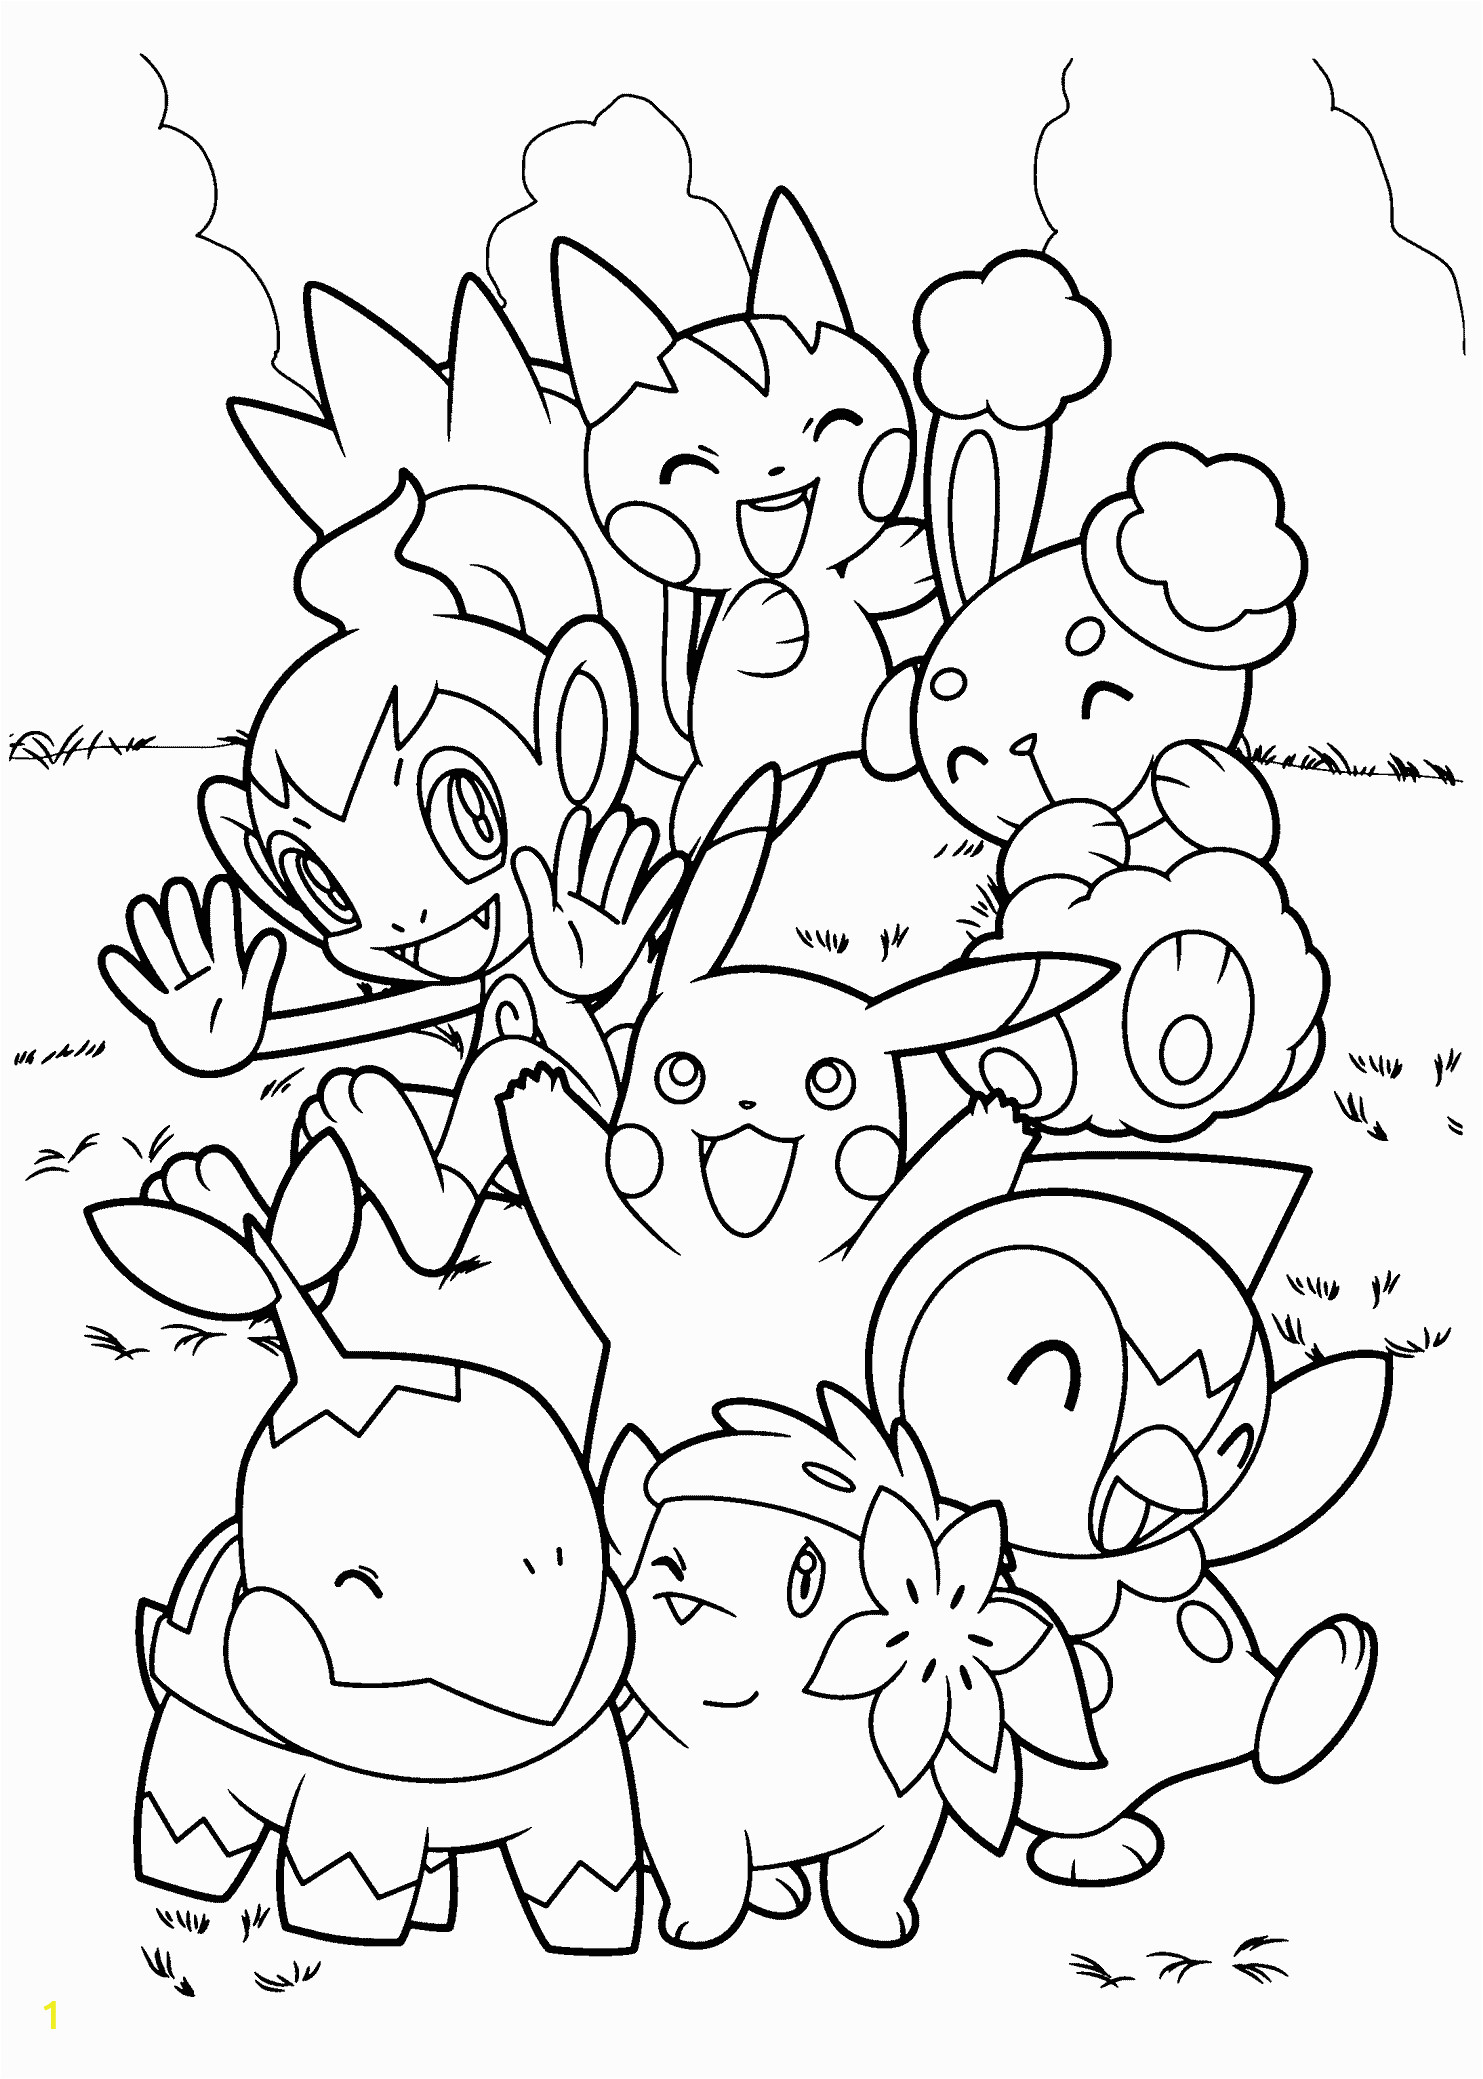 Beyblade Printable Coloring Pages top 93 Free Printable Pokemon Coloring Pages Line